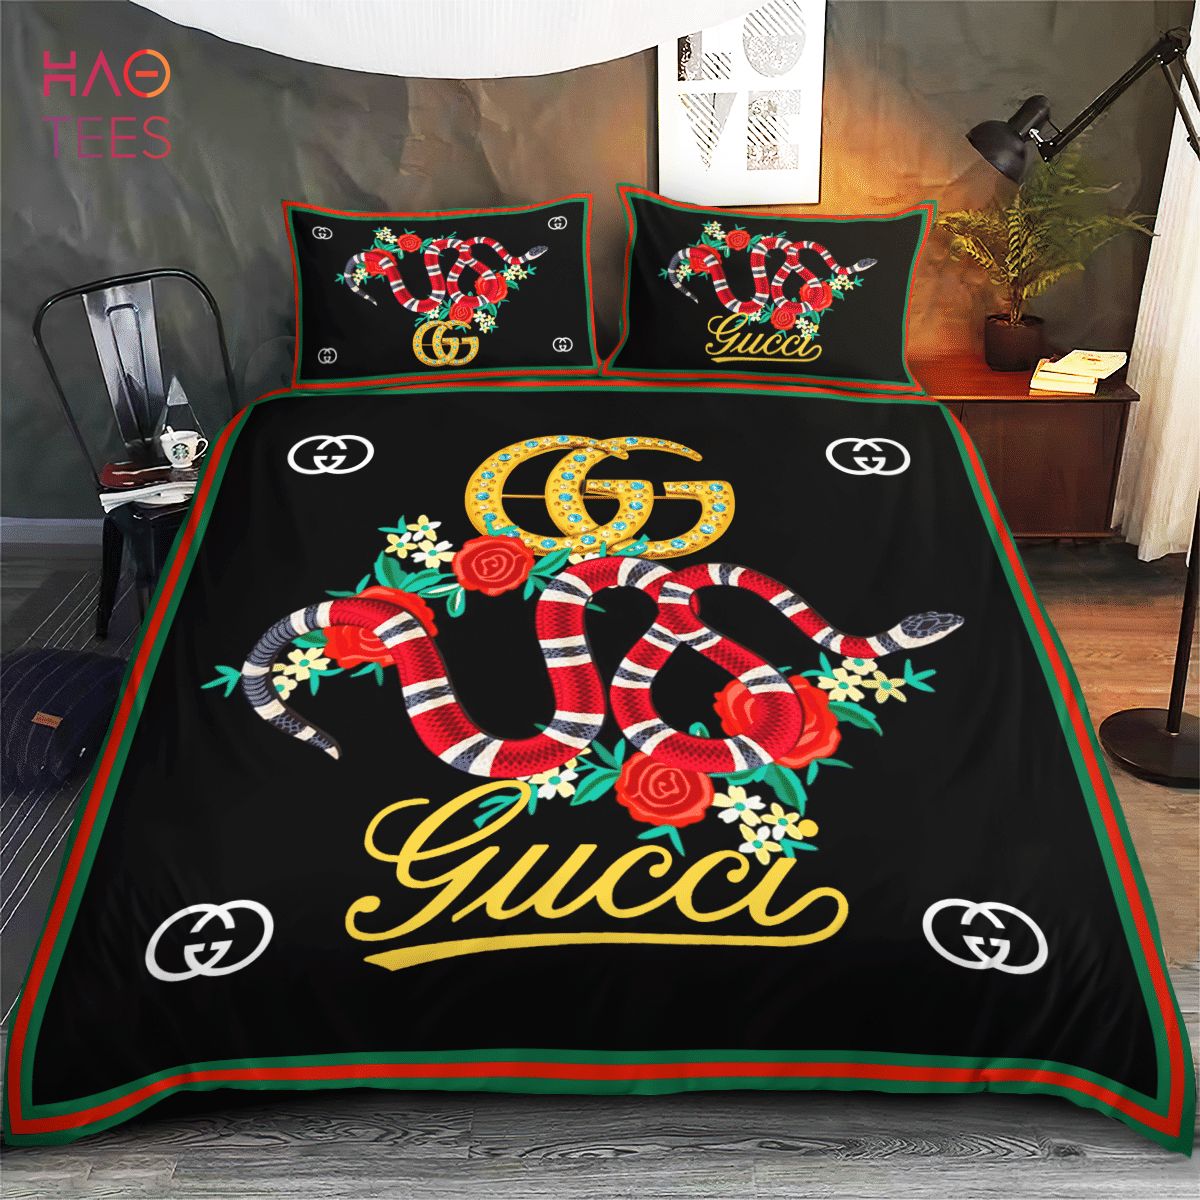 Gucci Black Gold Limited Edition Bedding Sets